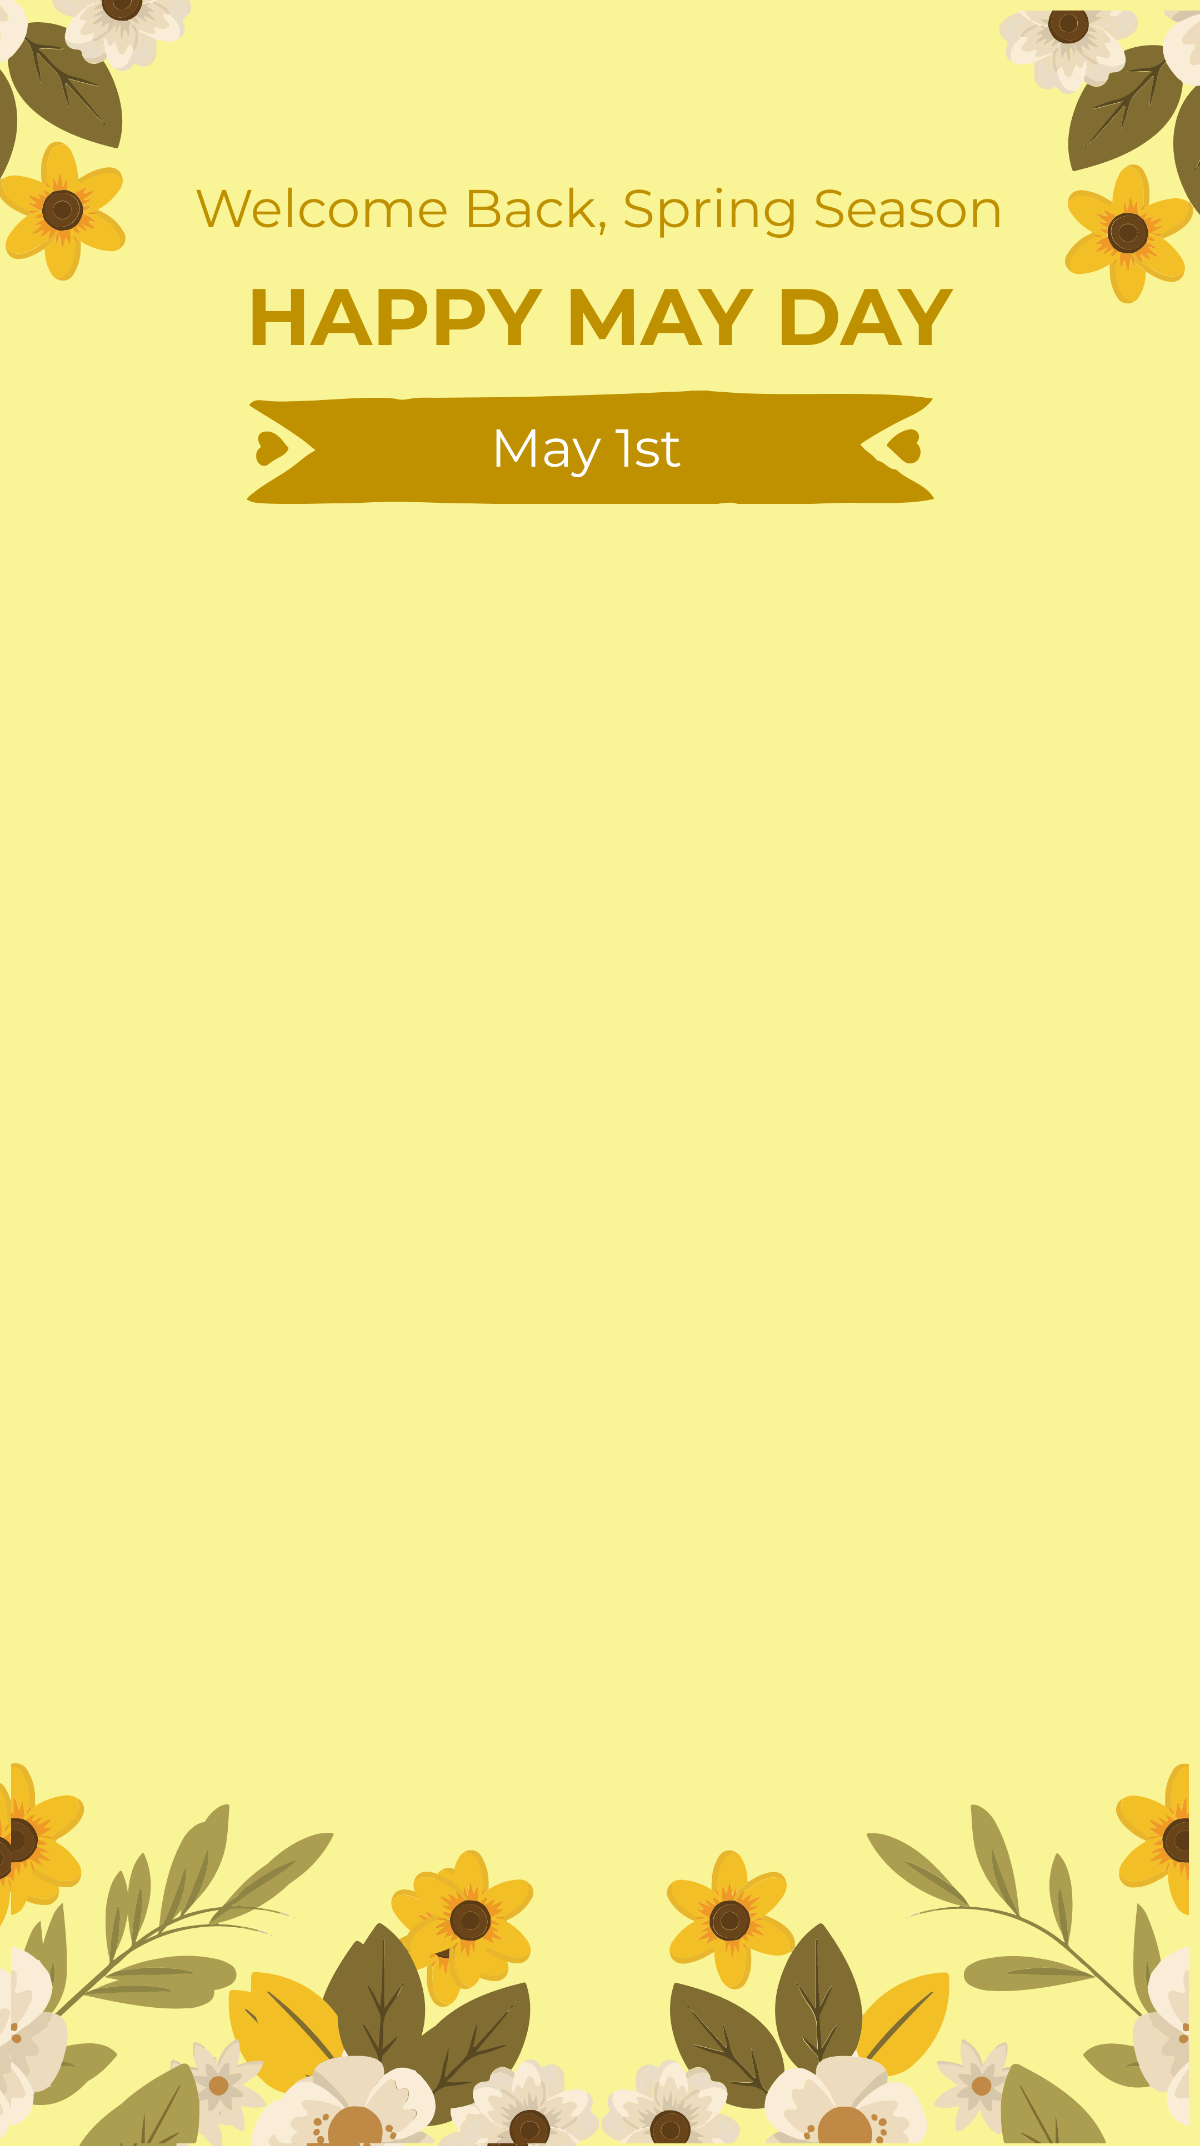 May Day Snapchat Geofilter Template